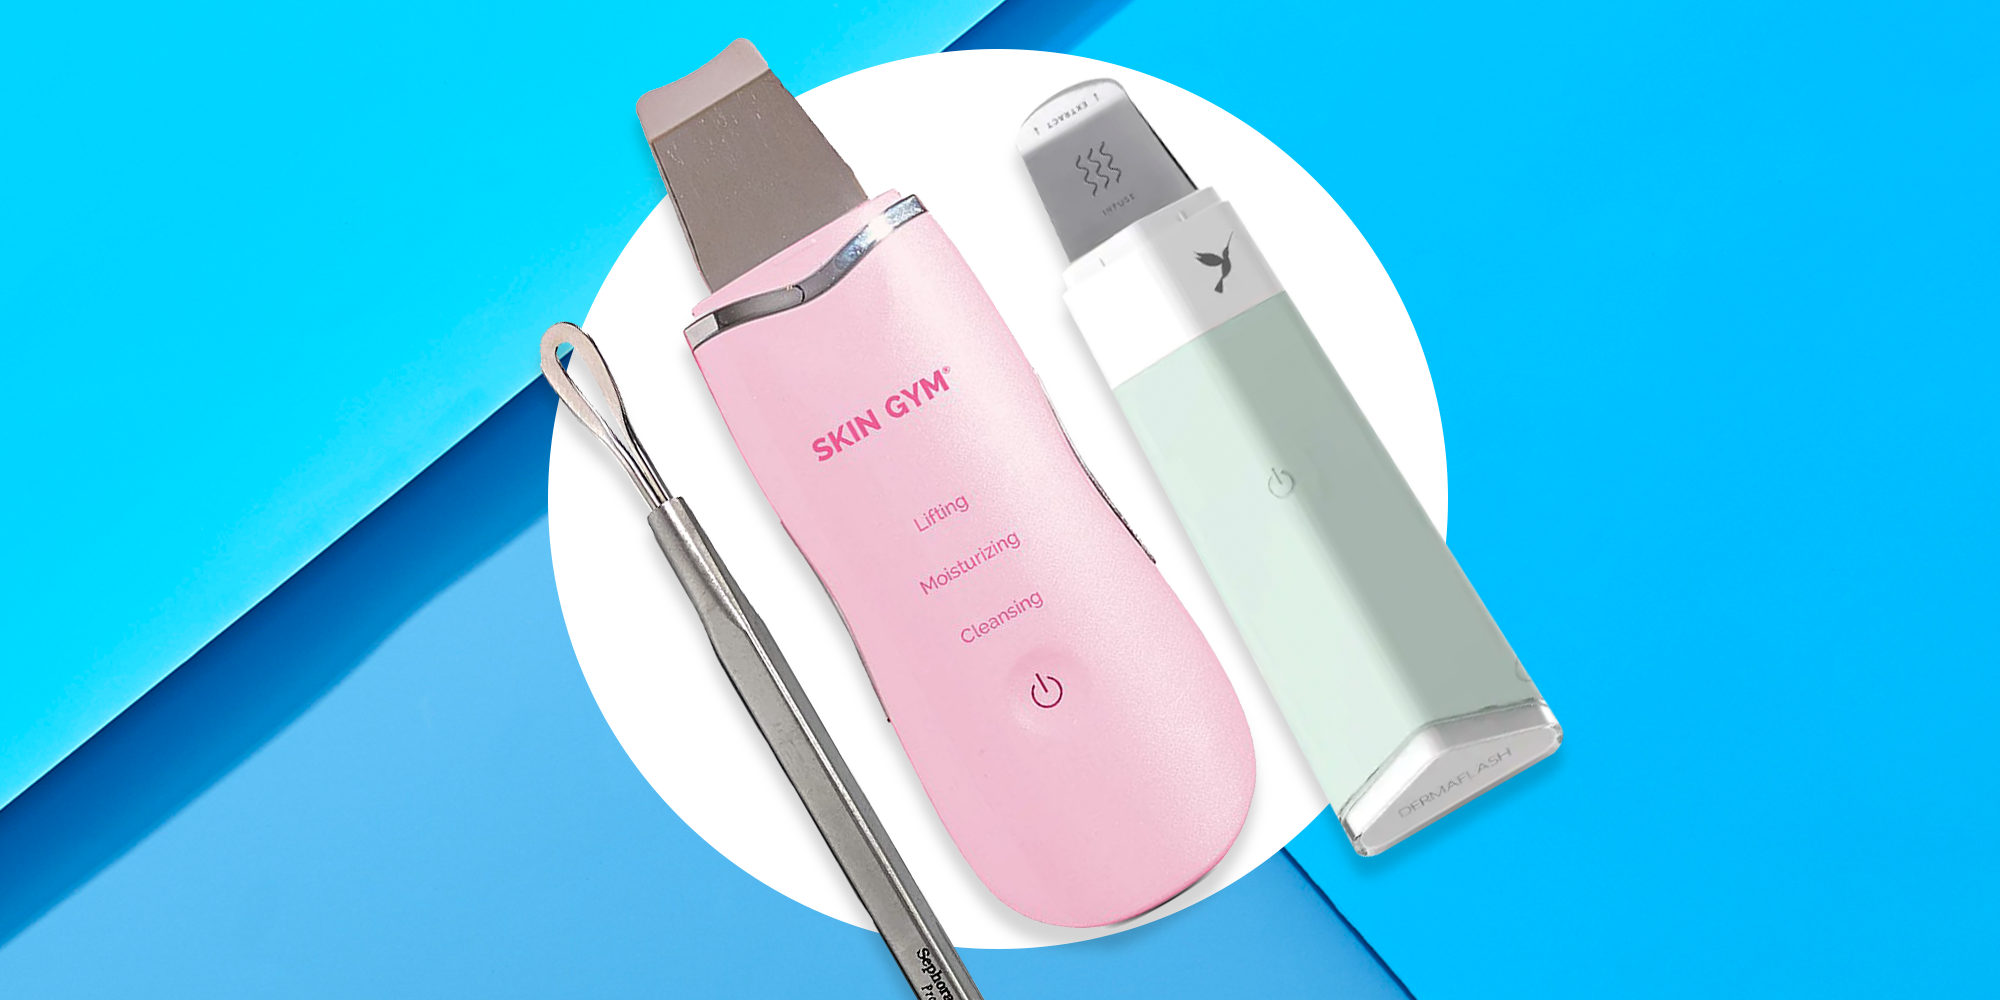  Skin Scrubber Face Spatula, Facial Skin Exfoliator Scraper and  Blackhead Remover Pore Cleaner with 5 Modes LED Display, Face Lifting Tool  Comedones Extractor for Facial Deep Cleansing. : Beauty & Personal